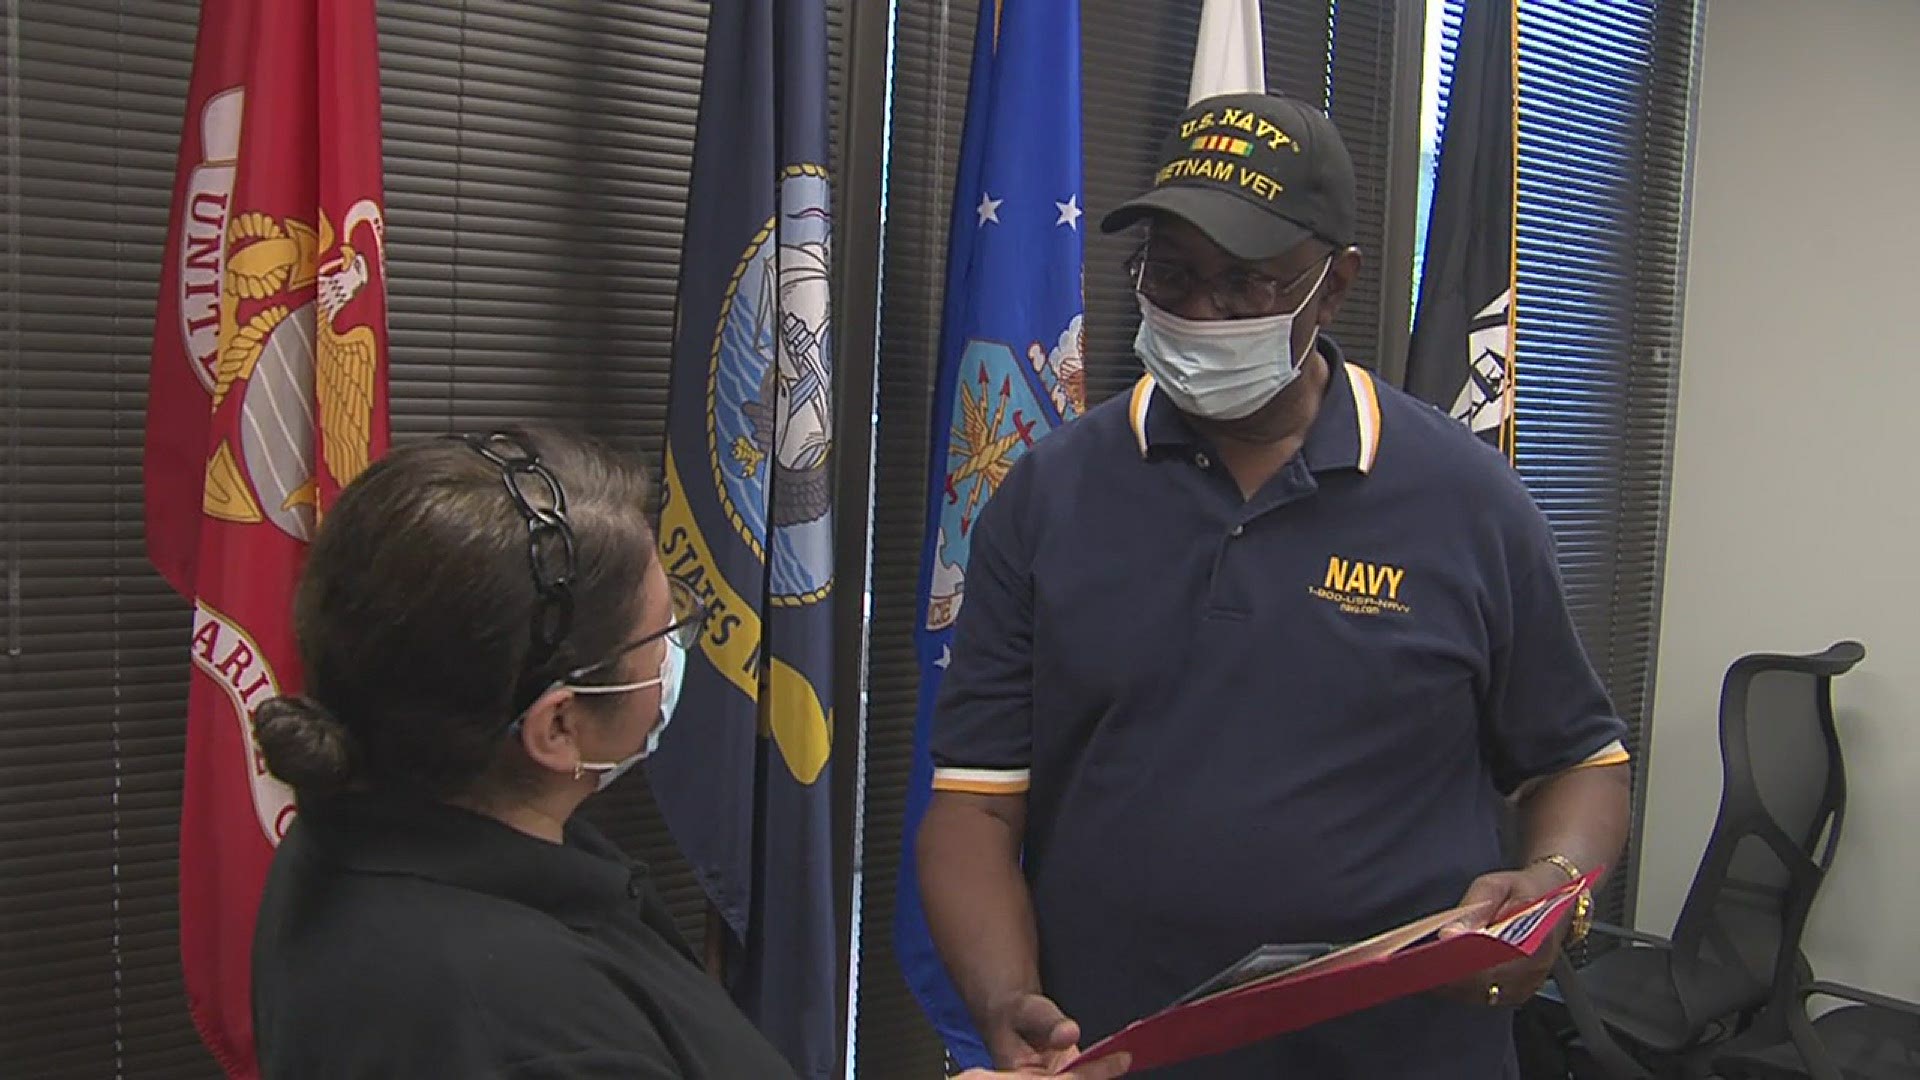 Memphis Vet Center hosts annual event to honor those who served during the Vietnam War.